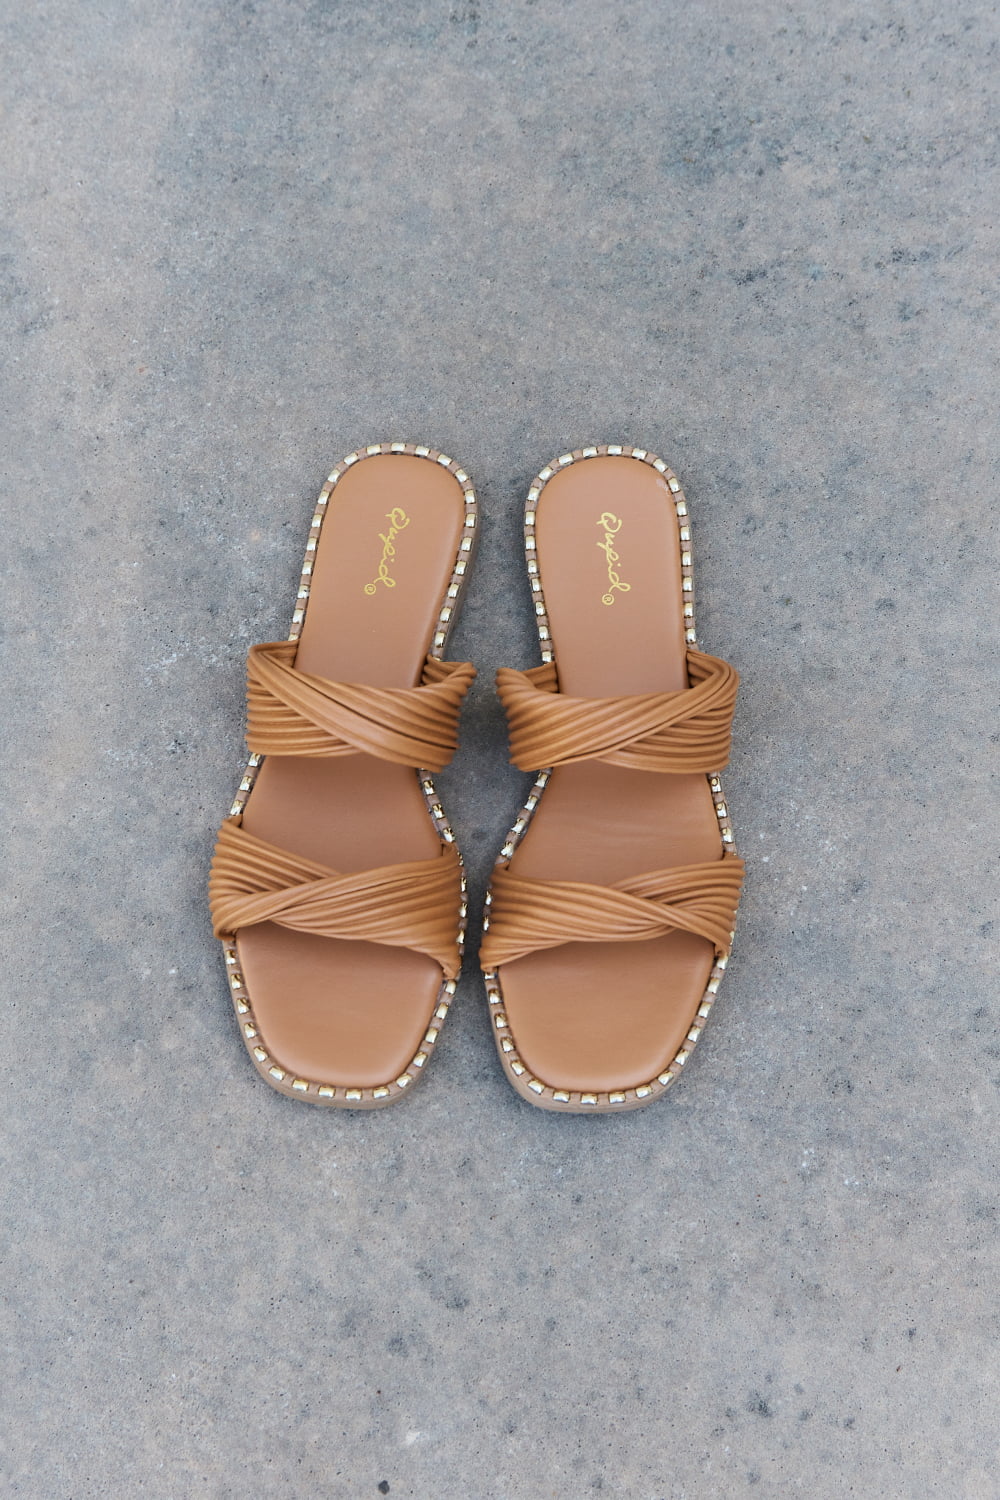 Double Strap Twist Sandals in CamelSandalsQupid